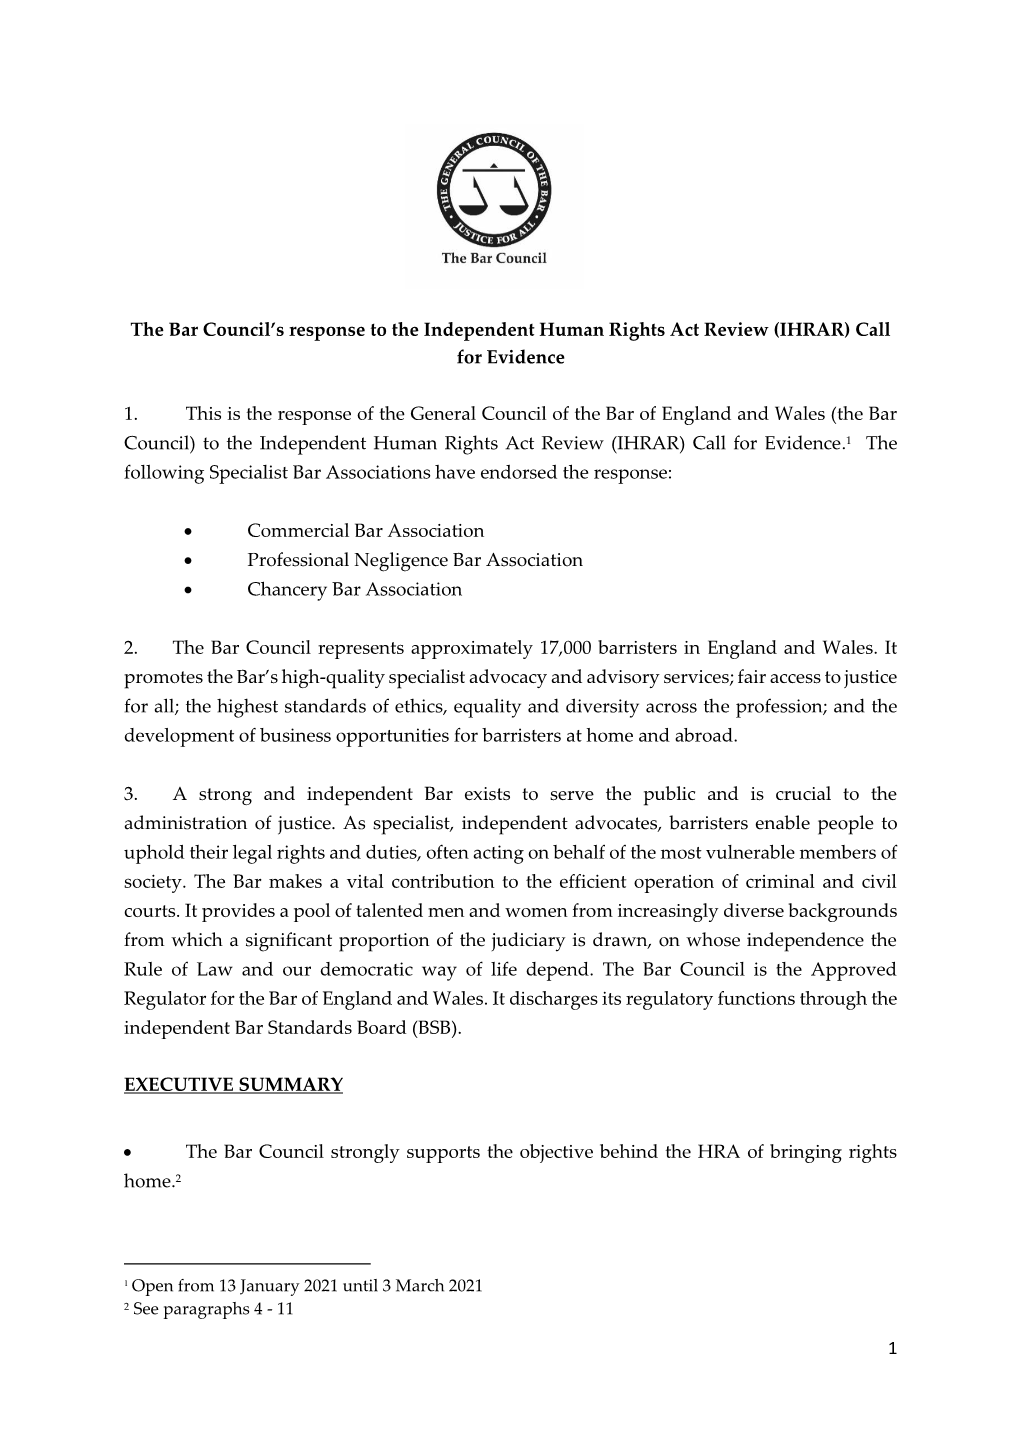 1 the Bar Council's Response to the Independent Human Rights Act